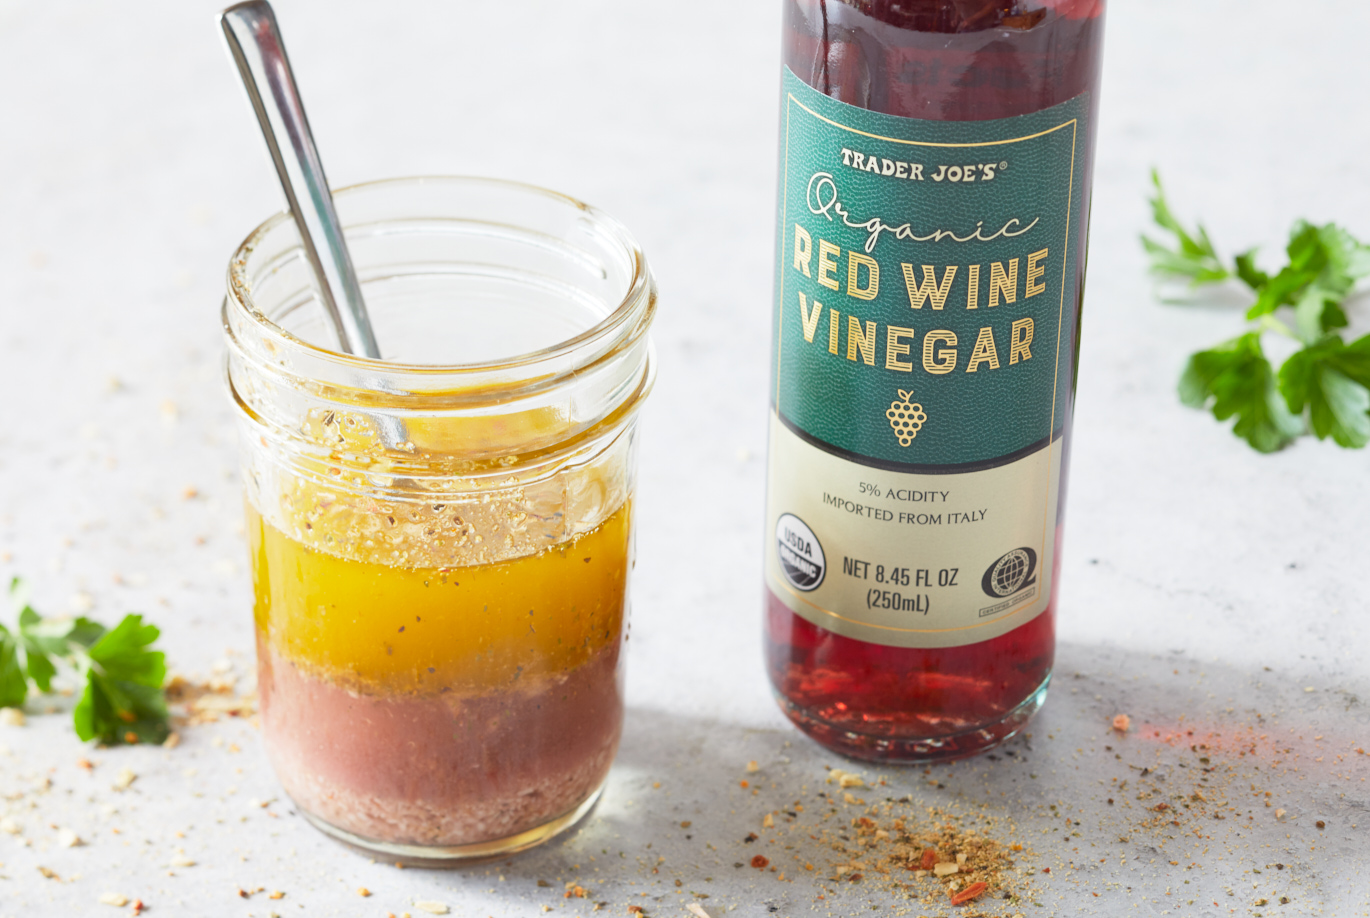 Trader Joe's Organic Red Wine Vinegar shown in recipe of 21 Seasoning Salute Vinaigrette; with spices and fresh parsley on surface